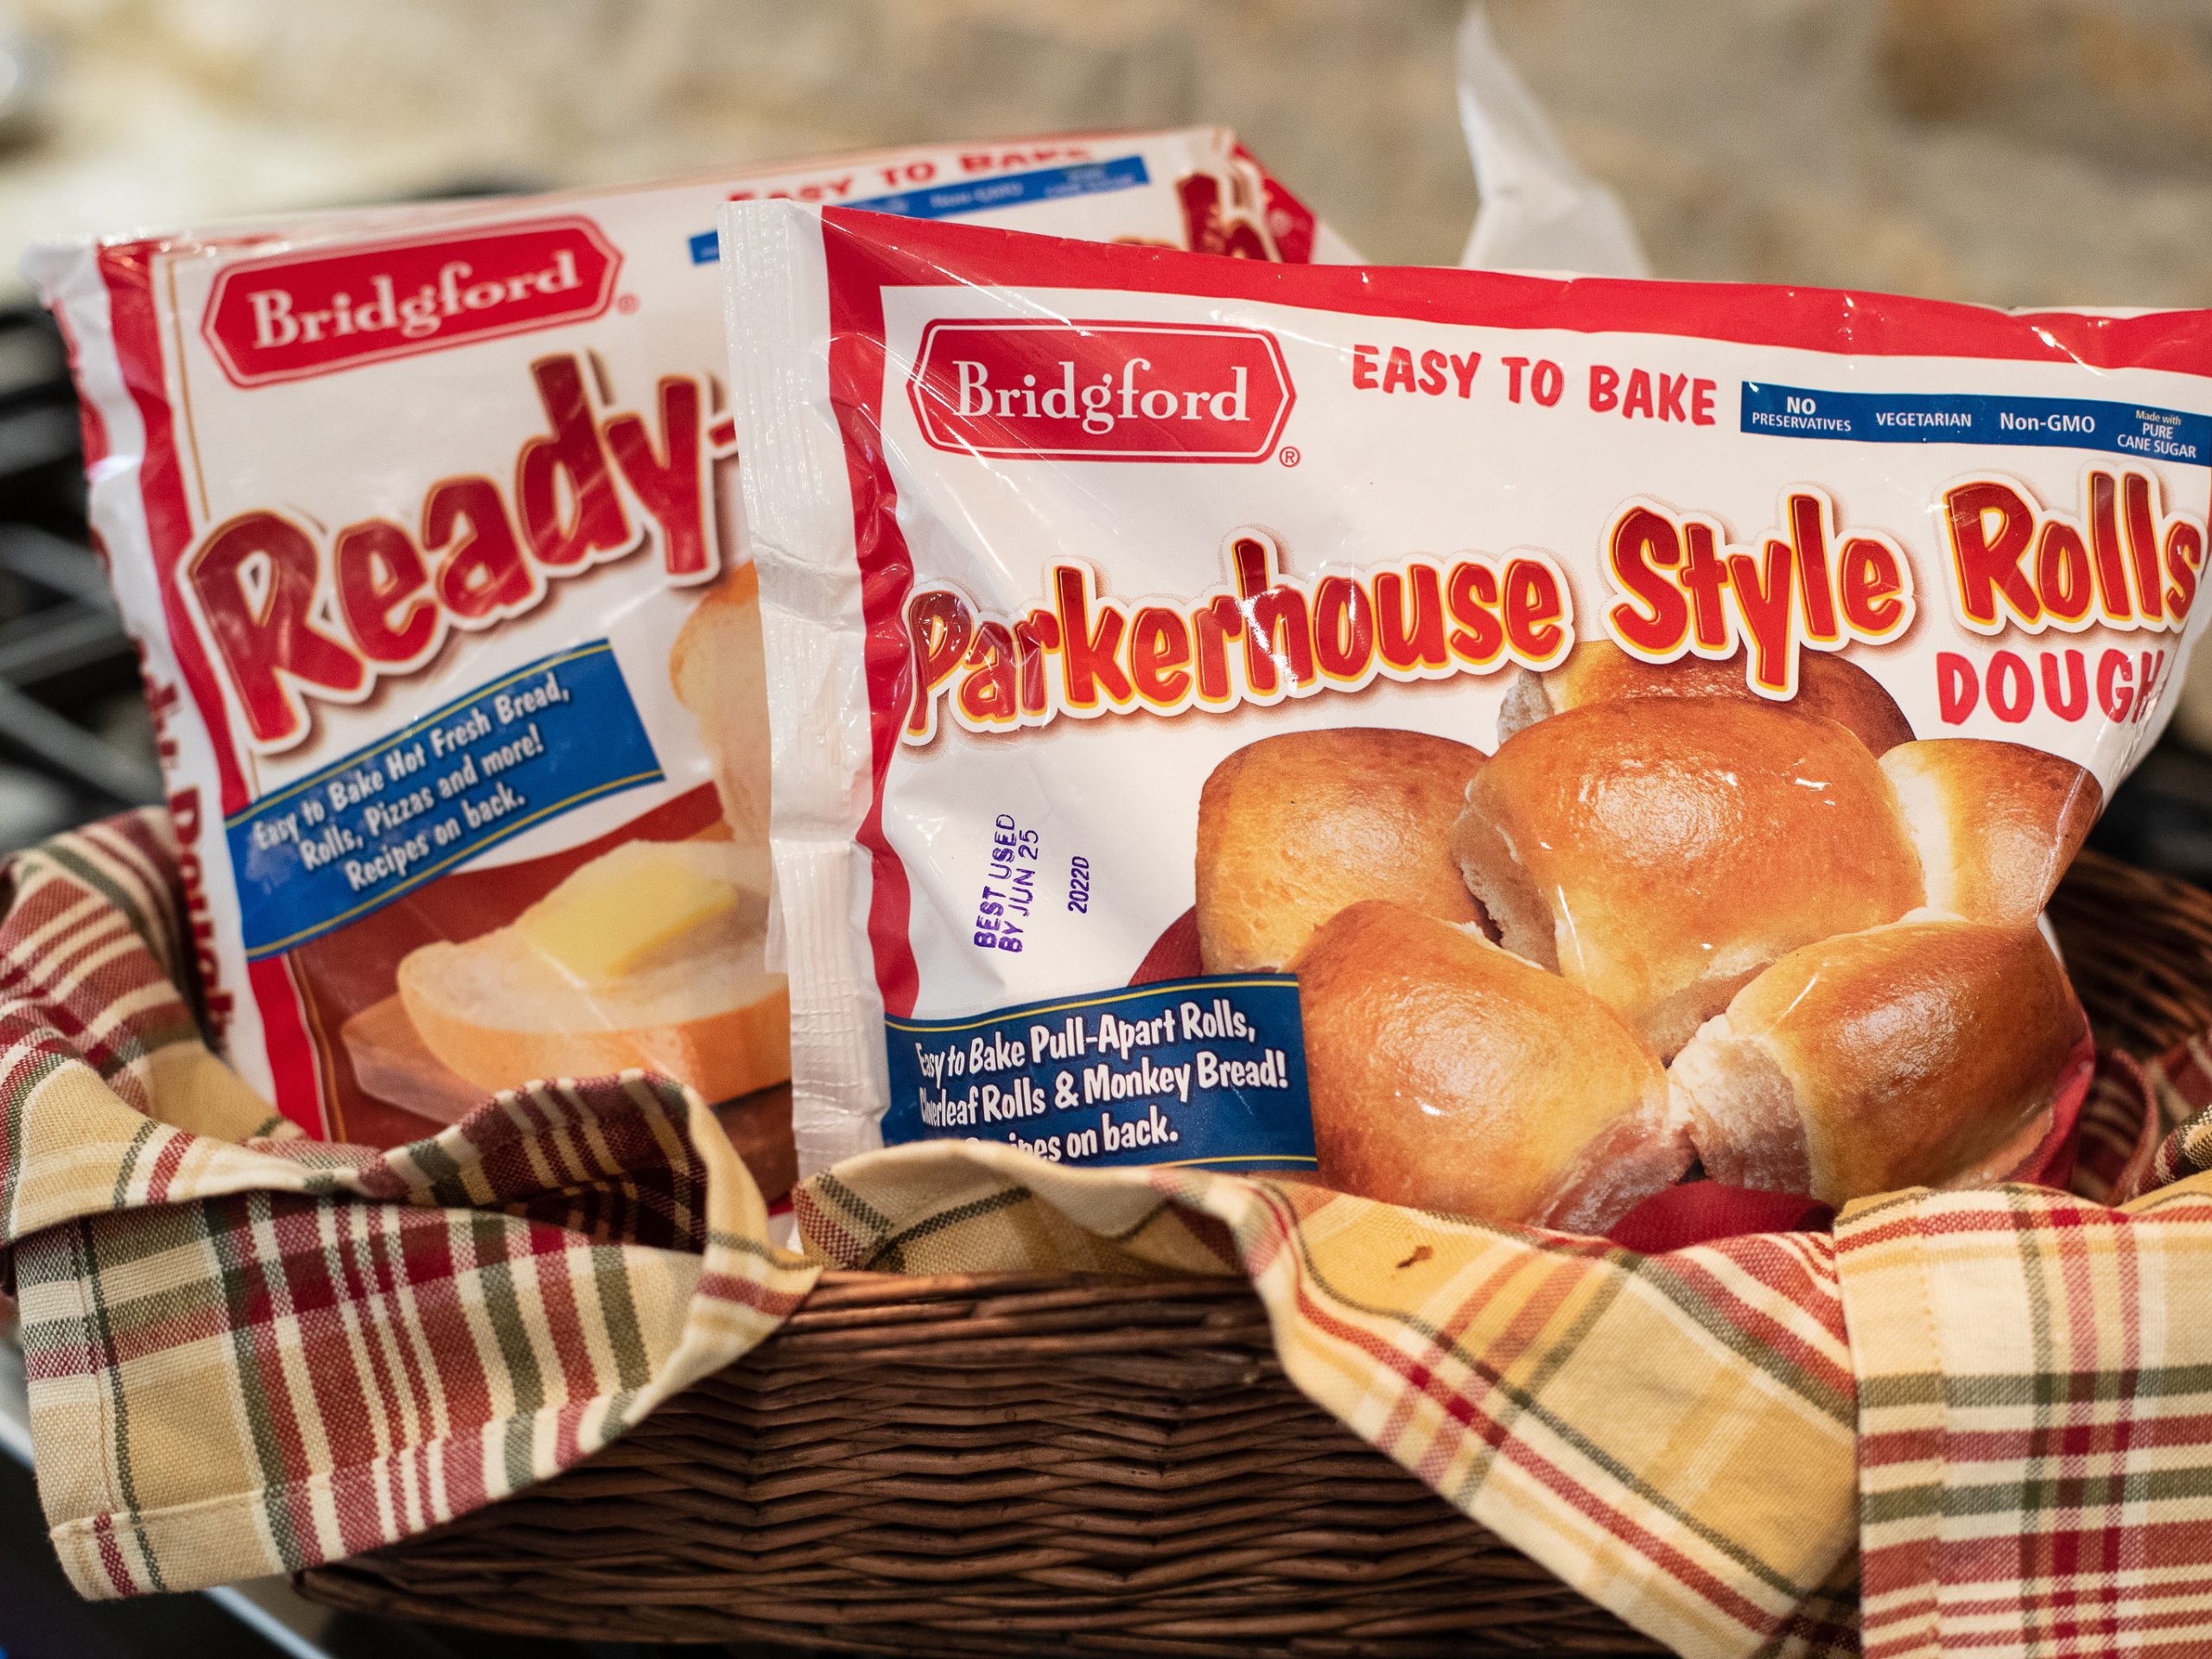 Grab Big Savings On Bridgford Rolls & Ready Dough Right Now At Publix – As Low As $1.30